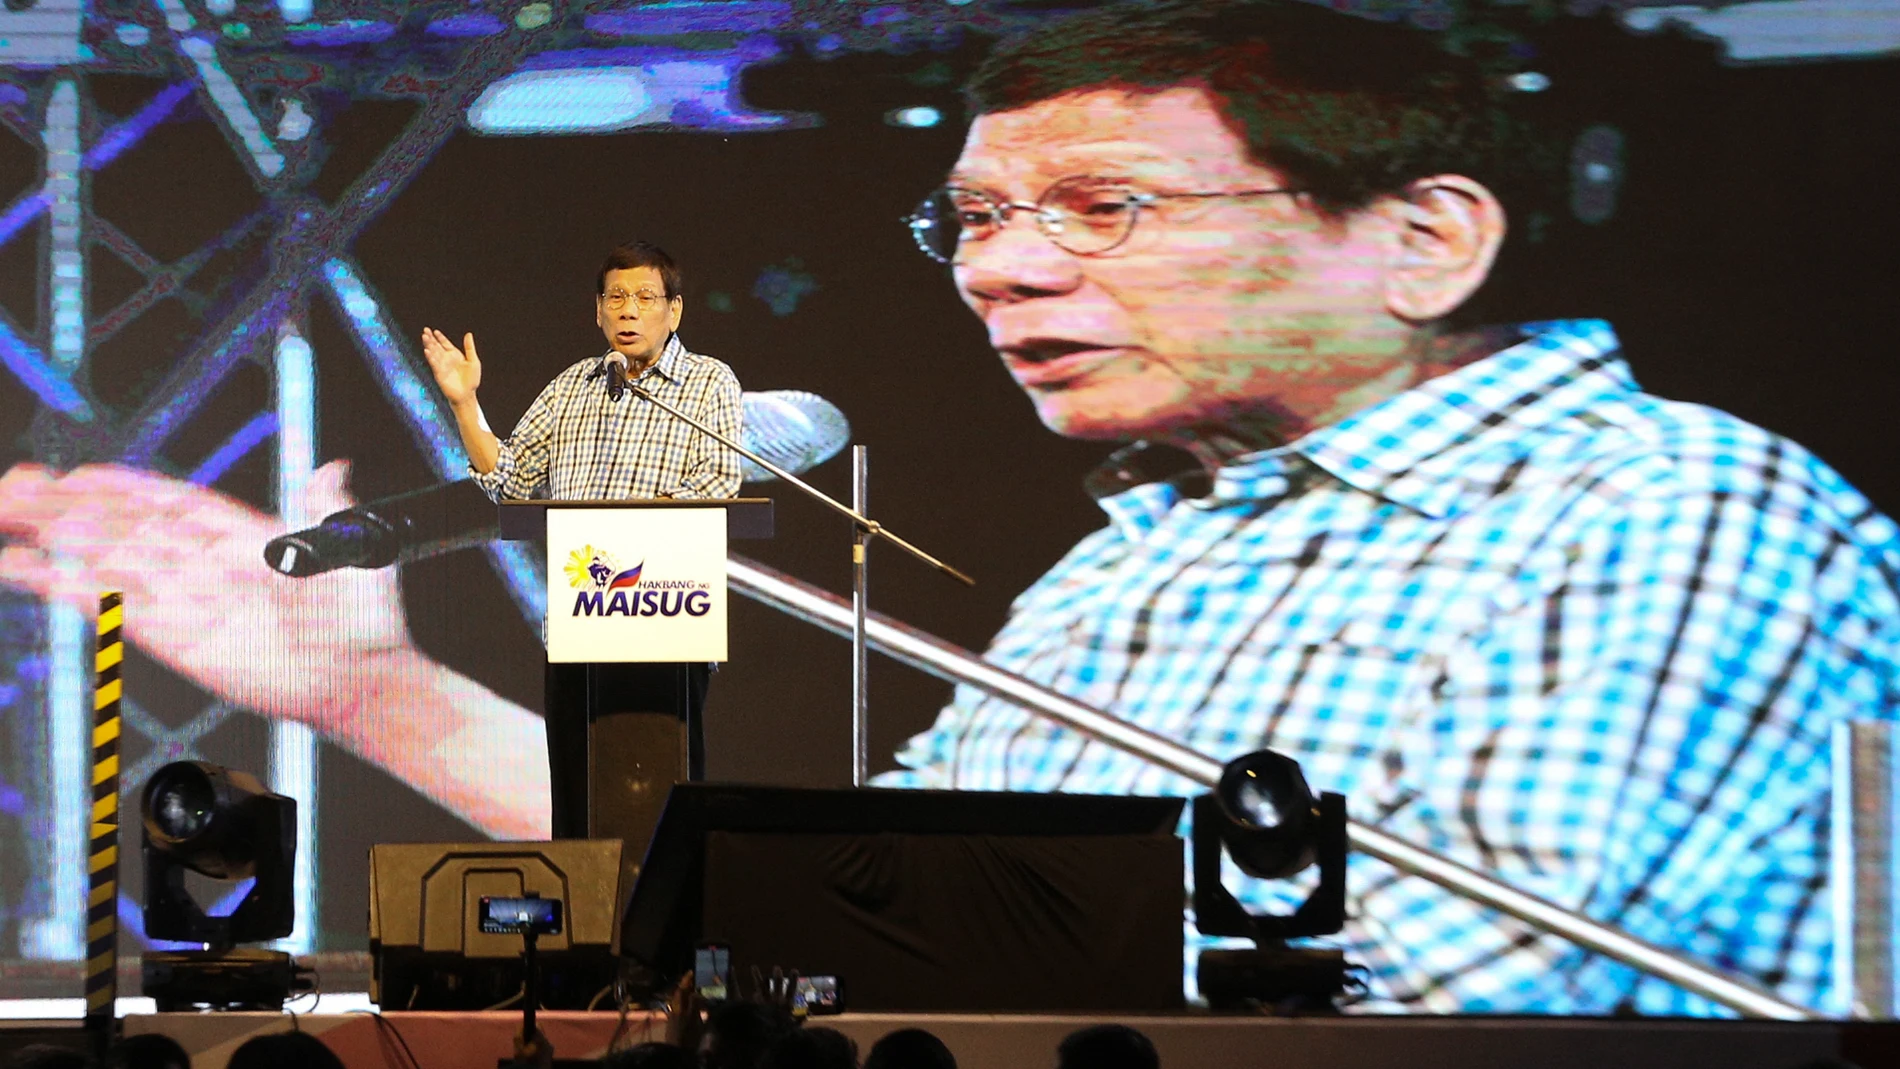 Former Philippine President Rodrigo Duterte gestures during his speech in Davao, southern Philippines late Sunday Jan. 28, 2024. Former President Duterte is throwing allegations at his successor, Fernando Marcos Jr., and even raising the prospect of removing him from office, bringing into the open a long-rumored split between the two.(AP Photo/Manman Dejeto)